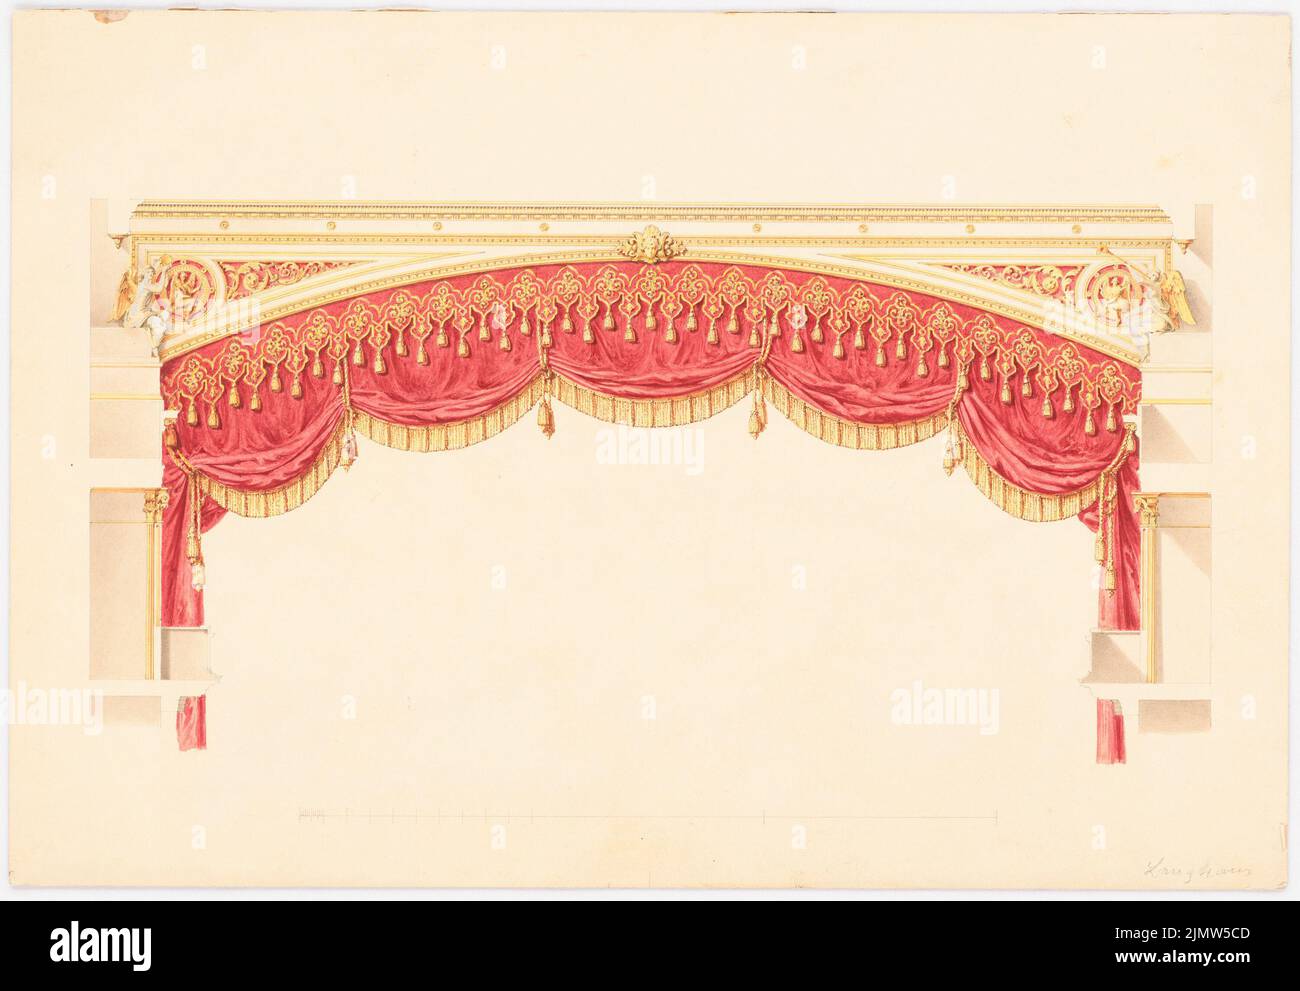 Langhans Carl Ferdinand (1782-1869), curtain for the city theater in Stettin (1846): View. Tusche watercolor on paper on cardboard, 33.7 x 48.5 cm (including scan edges) Langhans Carl Ferdinand  (1782-1869): Vorhang für das Stadttheater, Stettin Stock Photo